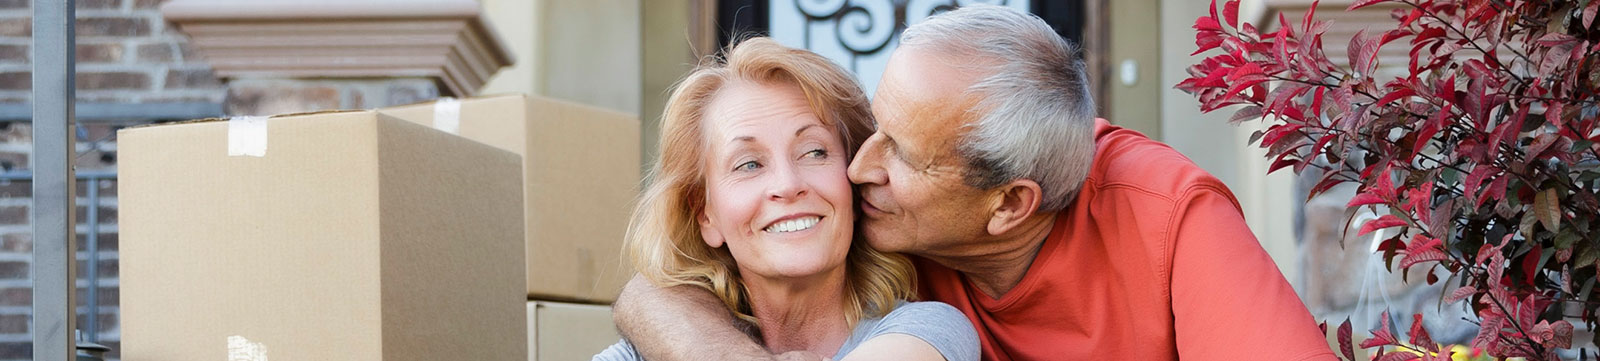 Mature couple moving into new house